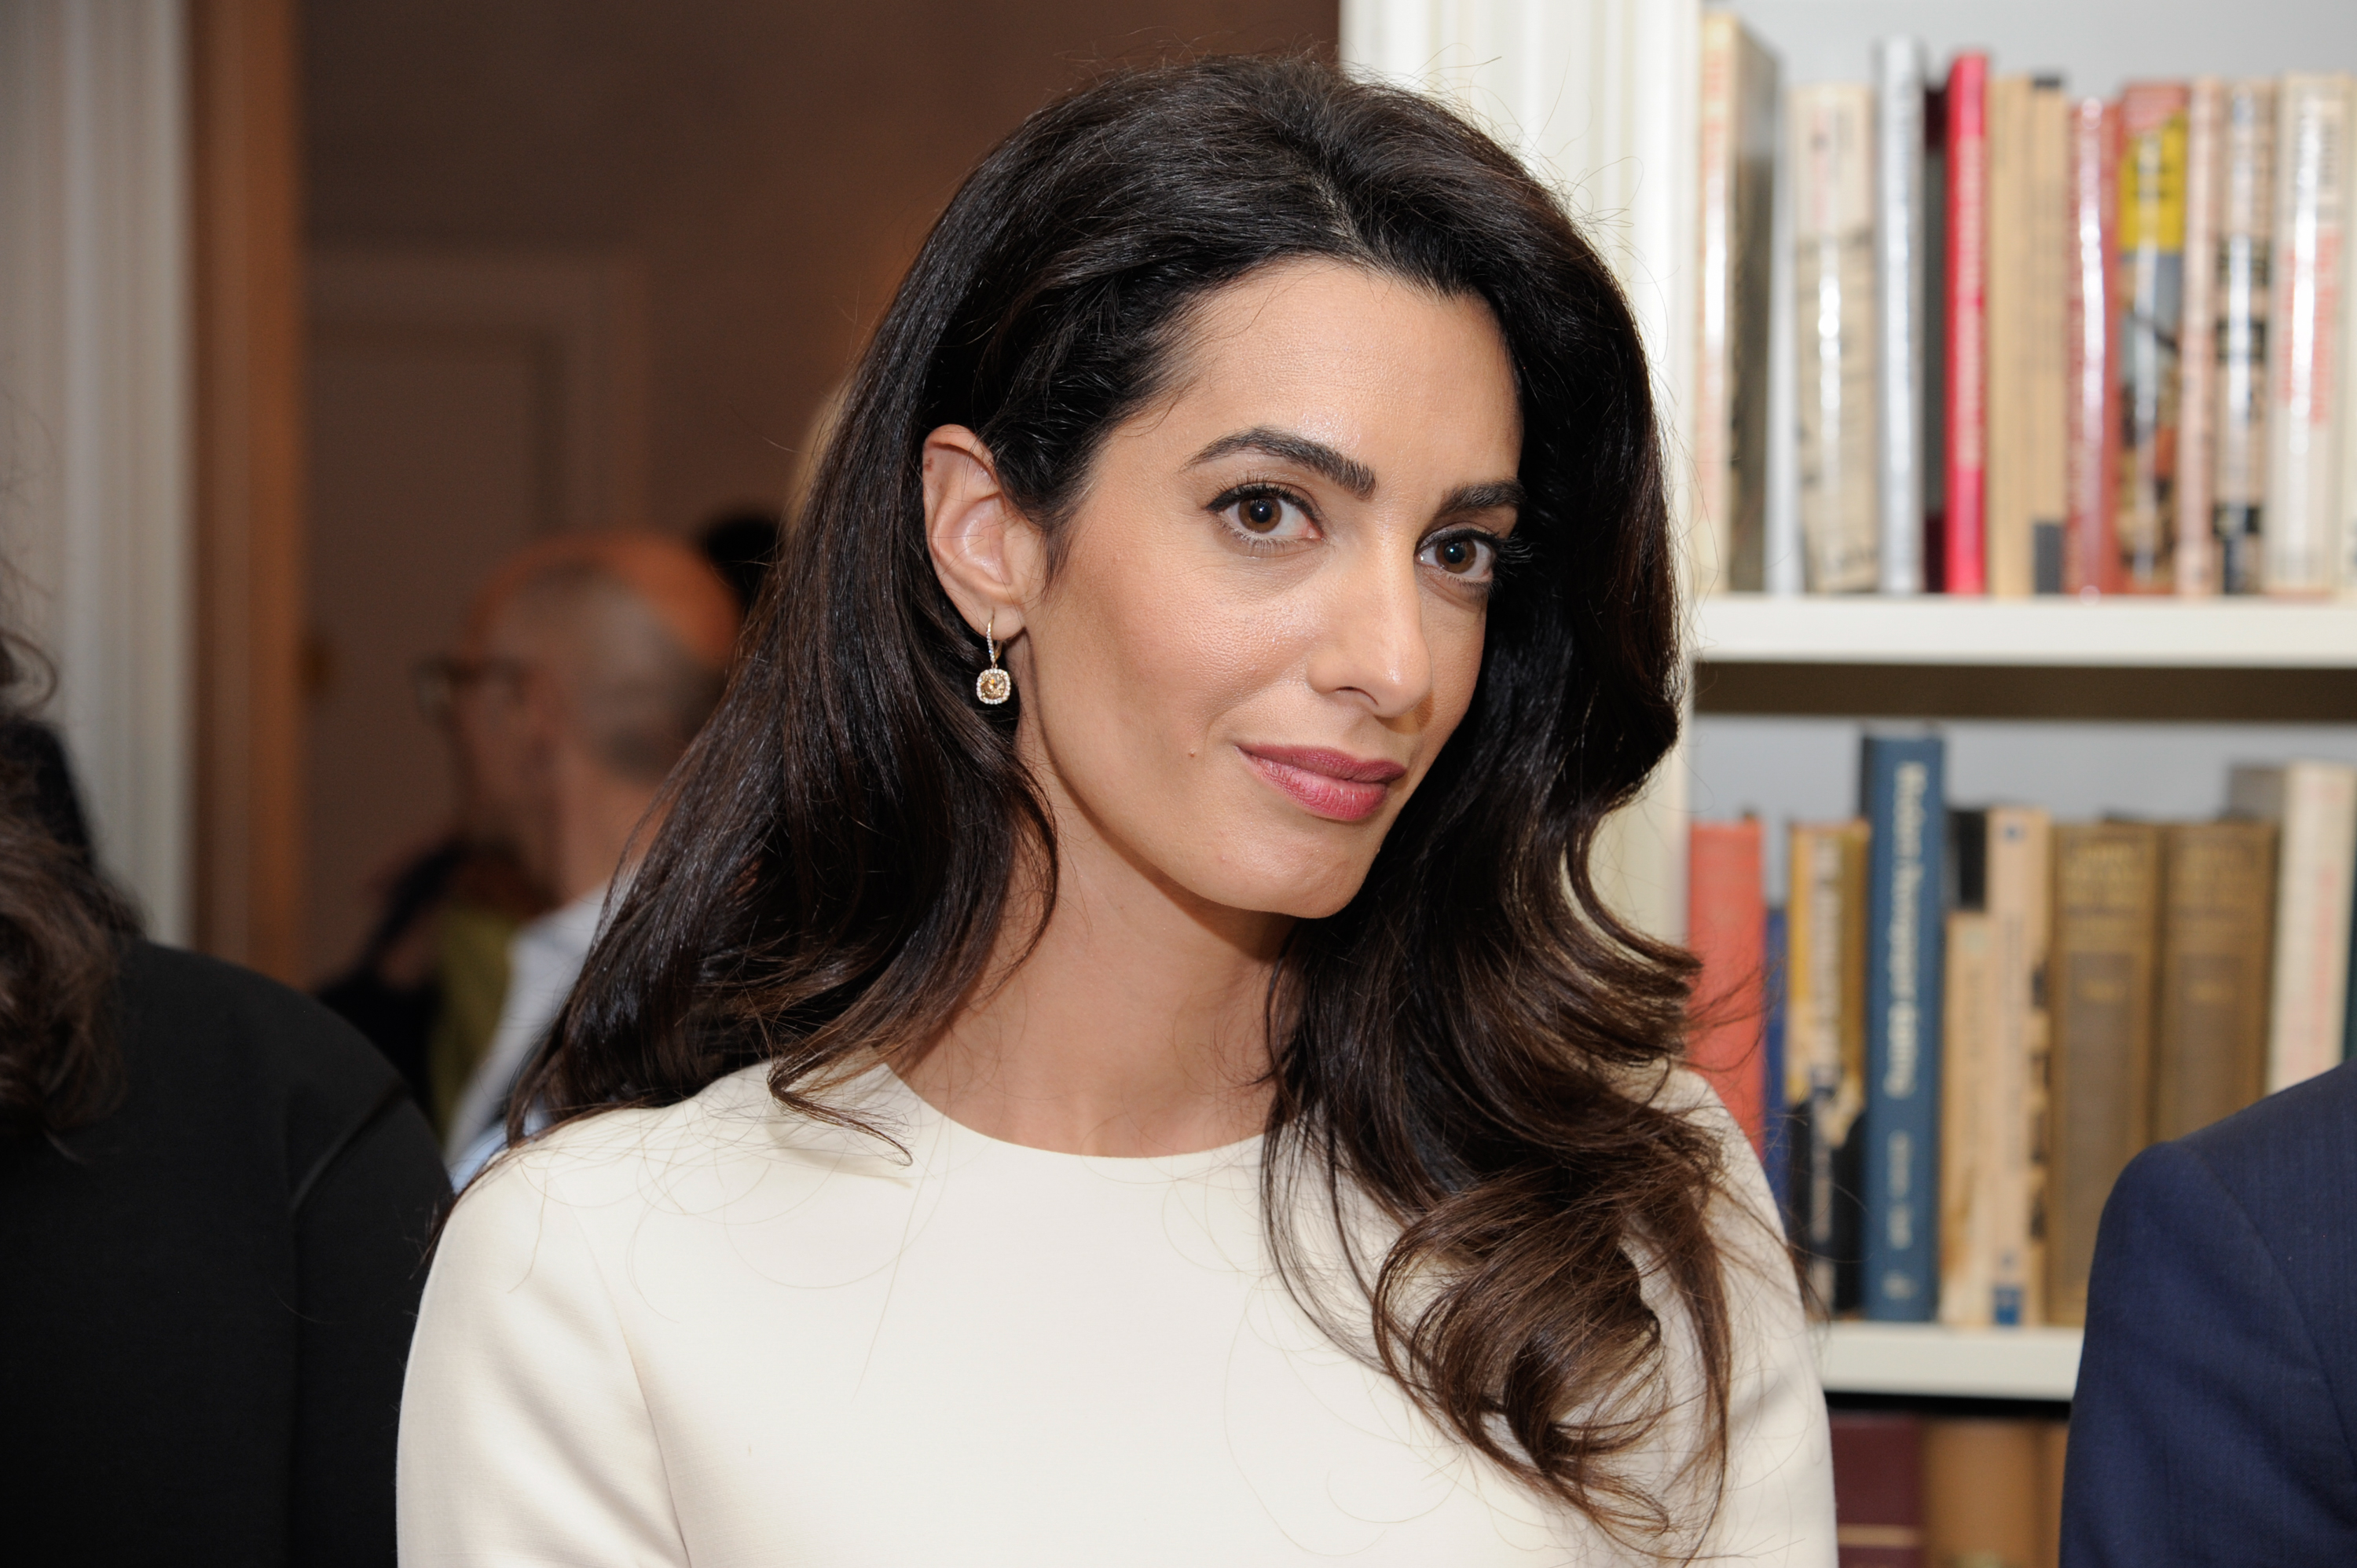 Amal Clooney attends the Women In The World reception honoring appointment of UN Office on Drugs and Crime Goodwill Ambassador Nadia Murad on September 16, 2016 in New York City. (Matthew Eisman—Getty Images)